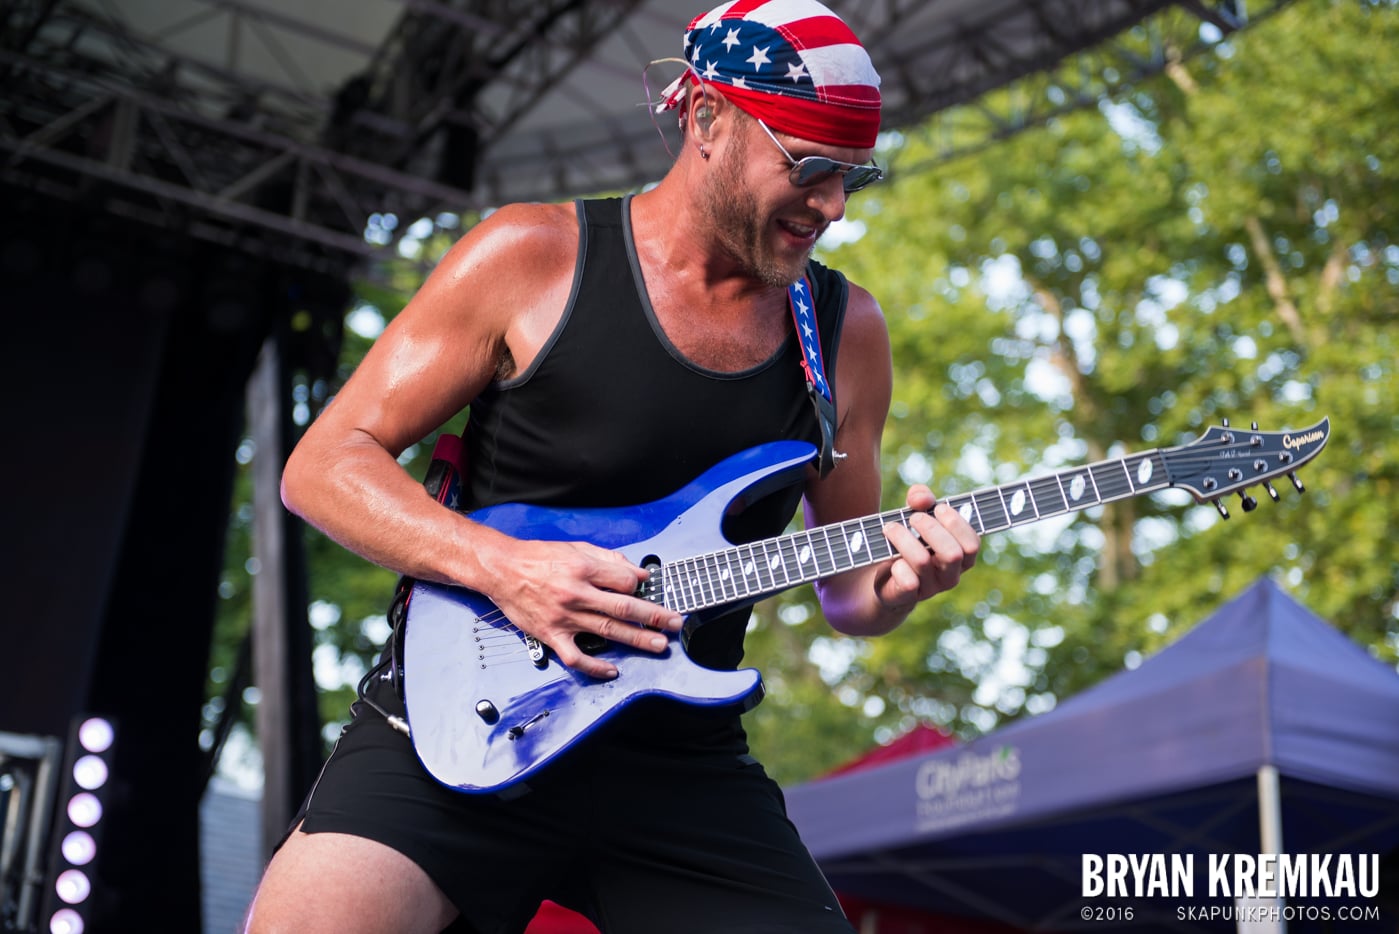 Killswitch Engage @ Central Park SummerStage, NYC - 7.28.15 (7)